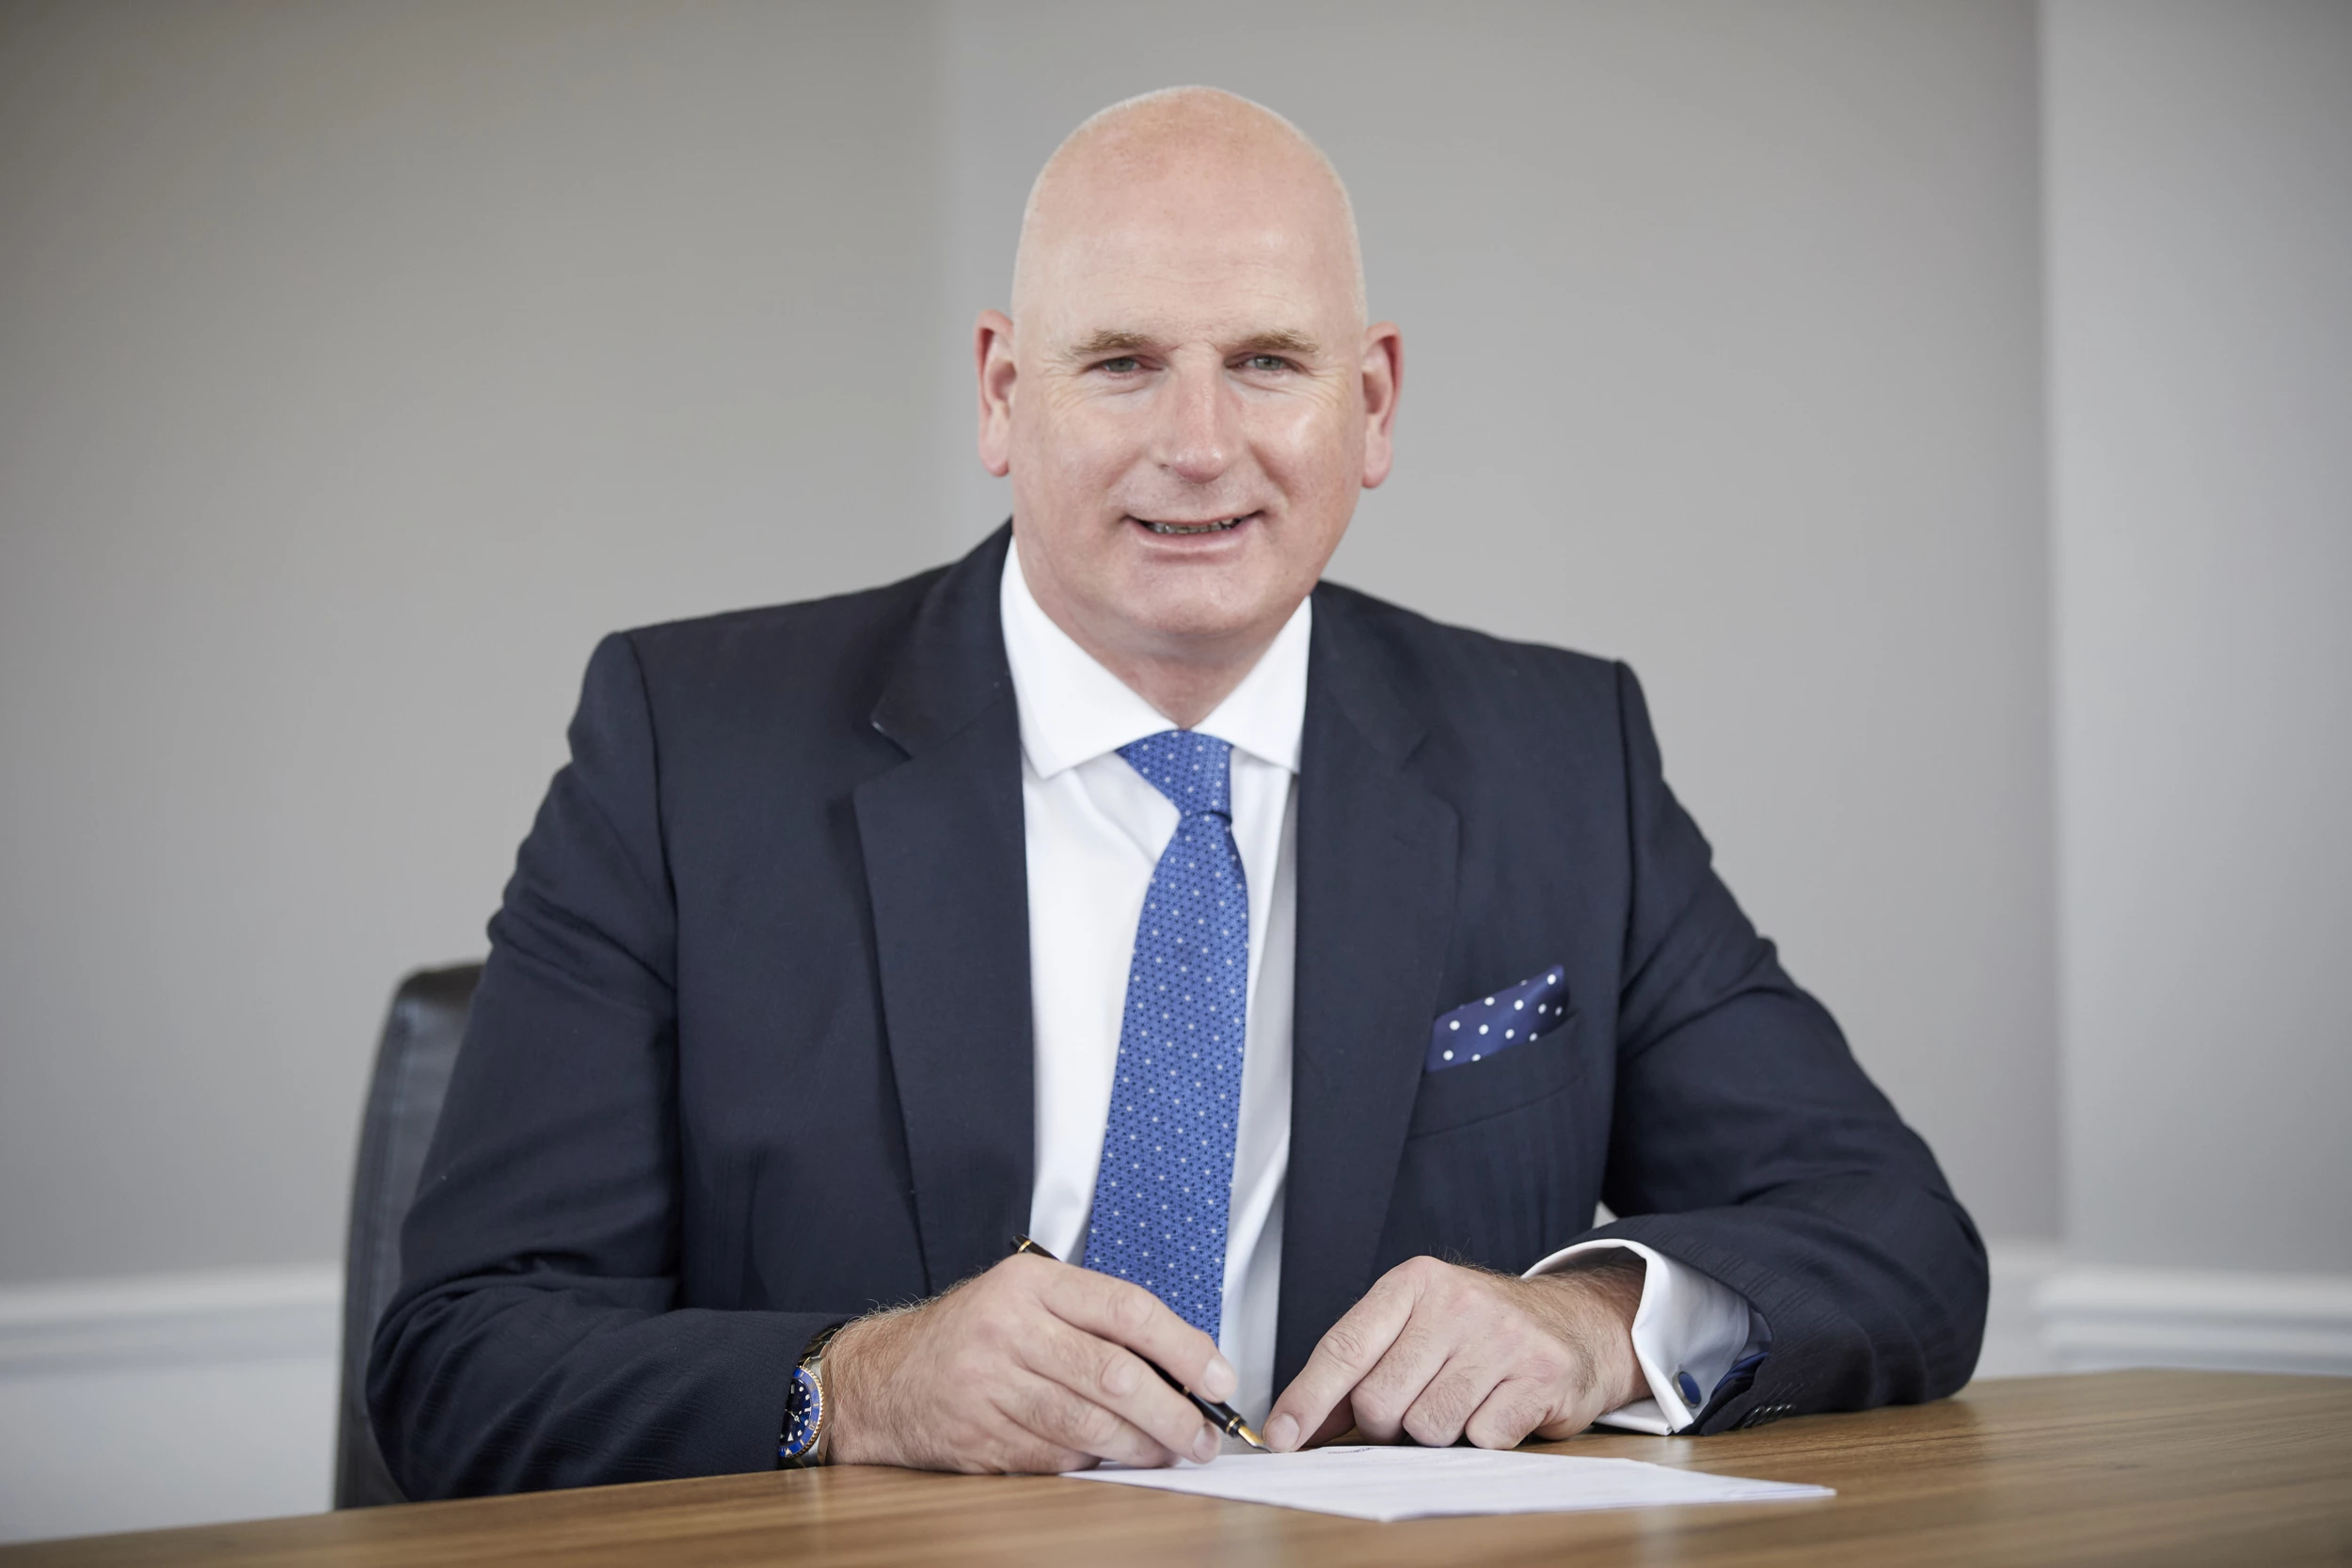 James Murphy, founder and chief executive of PAM Group